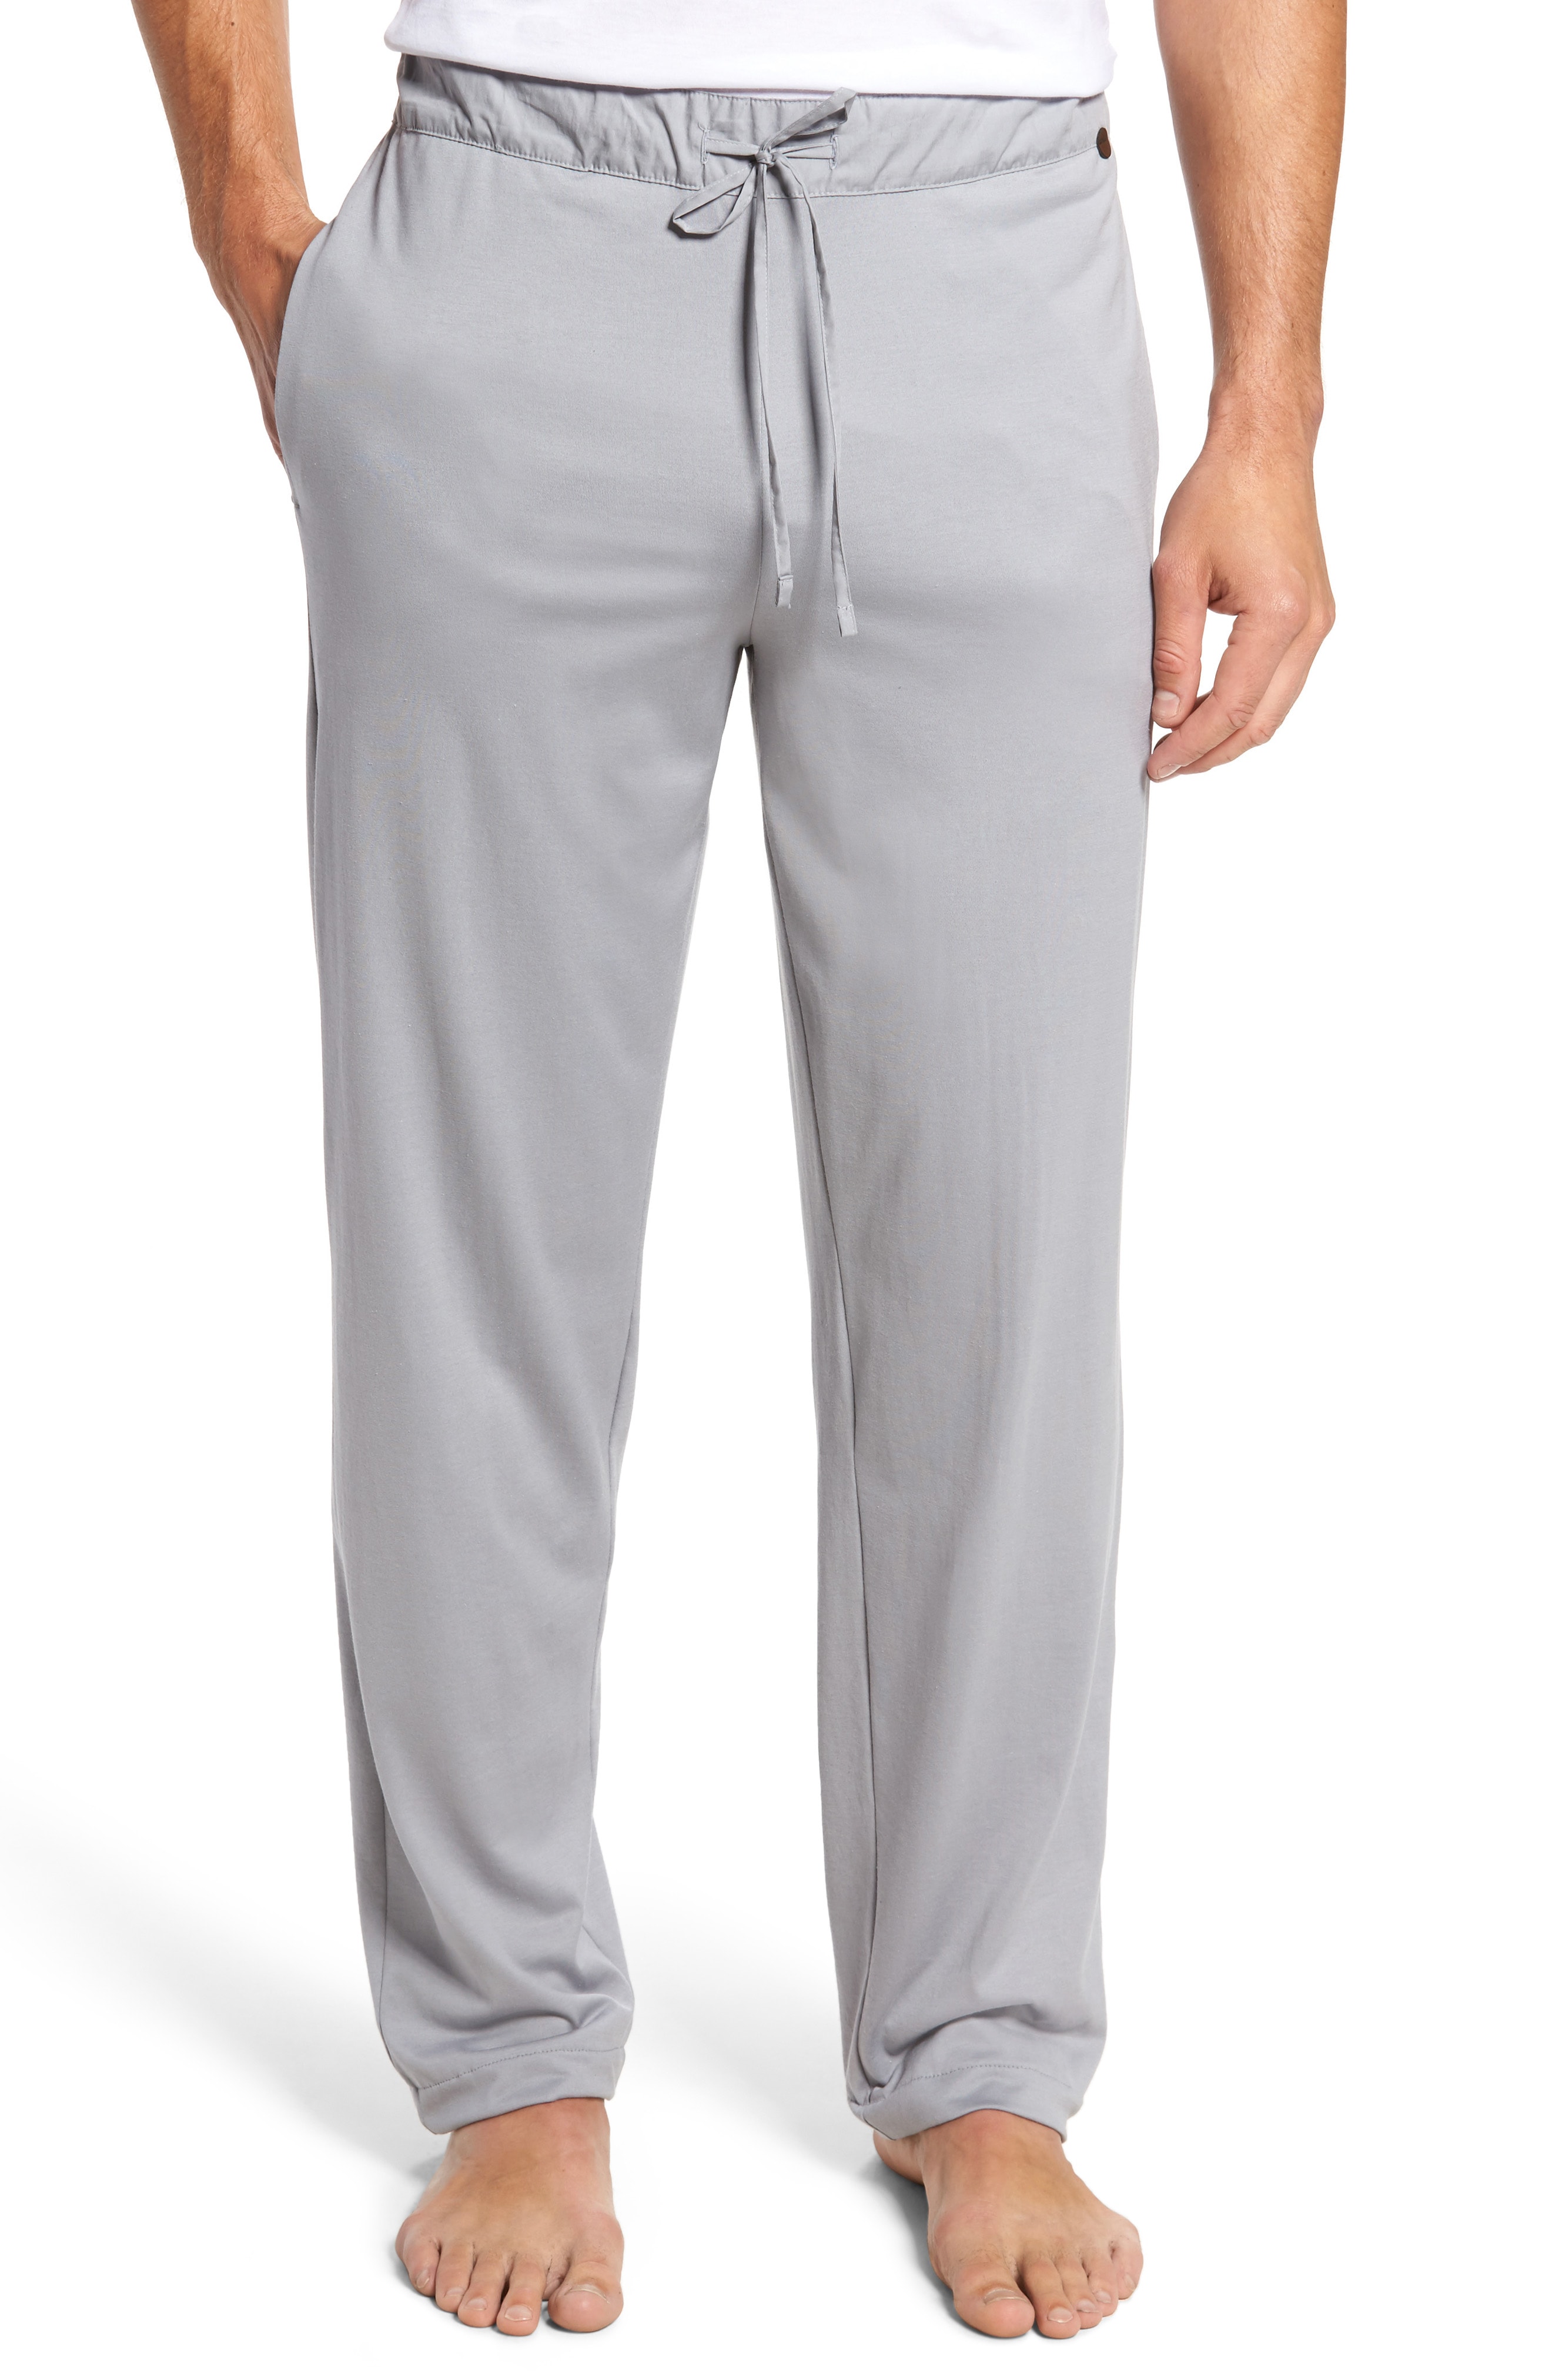 Men’s Hanro Night & Day Knit Lounge Pants, Size Small – Grey | The ...